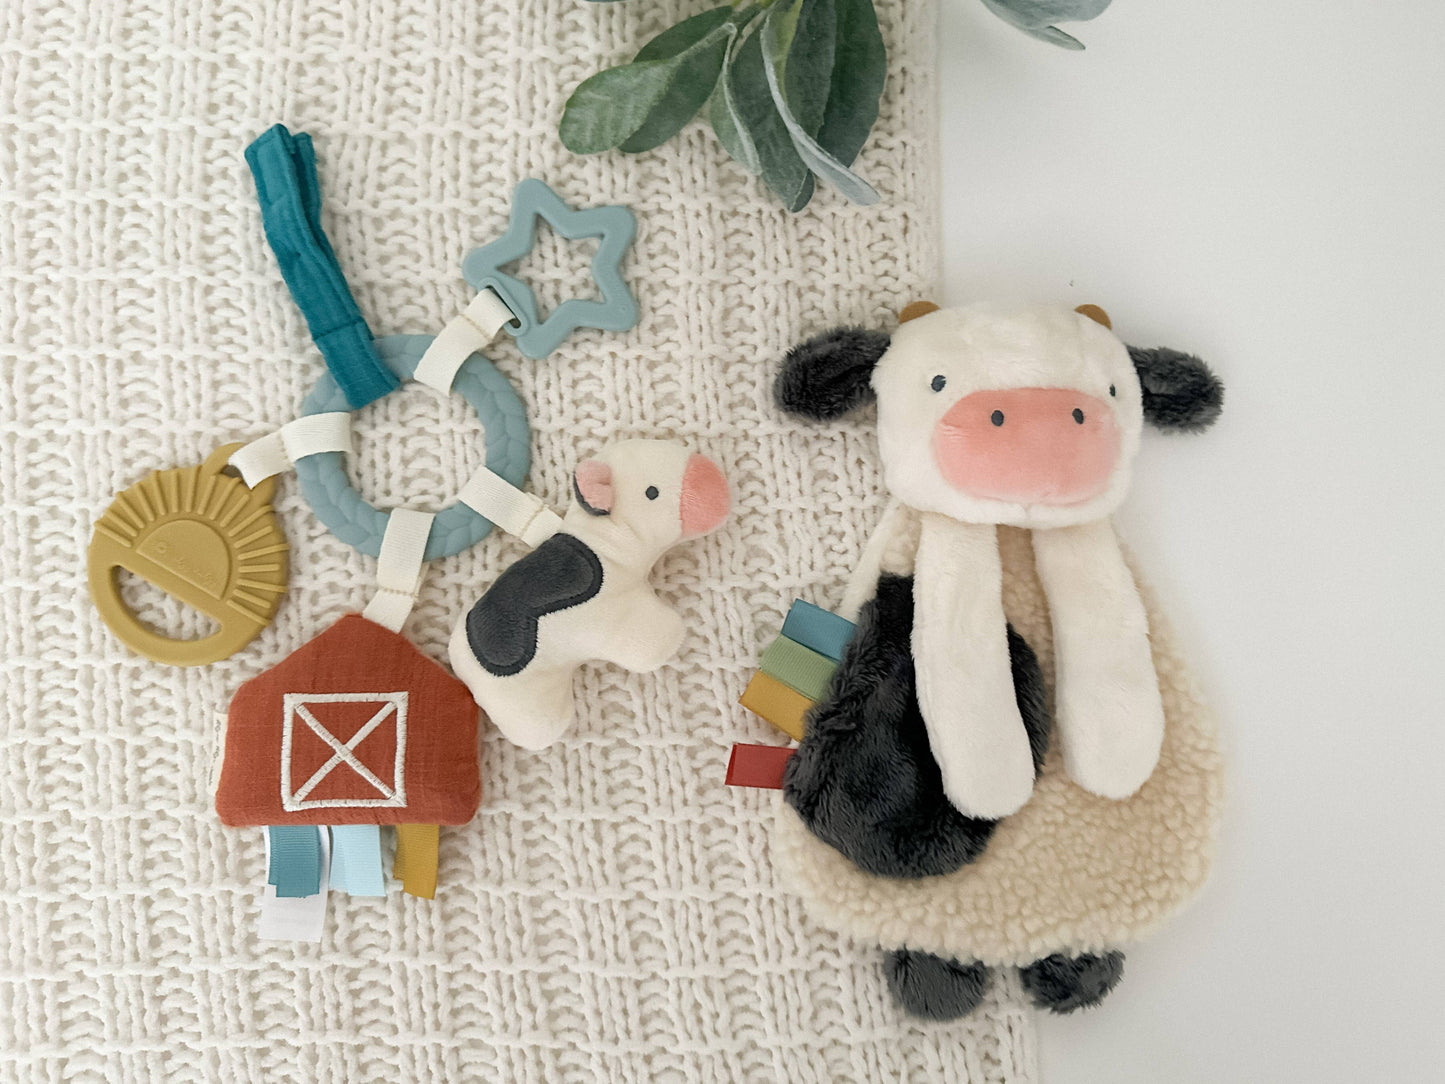 Bitzy Busy Gift Set - Cow